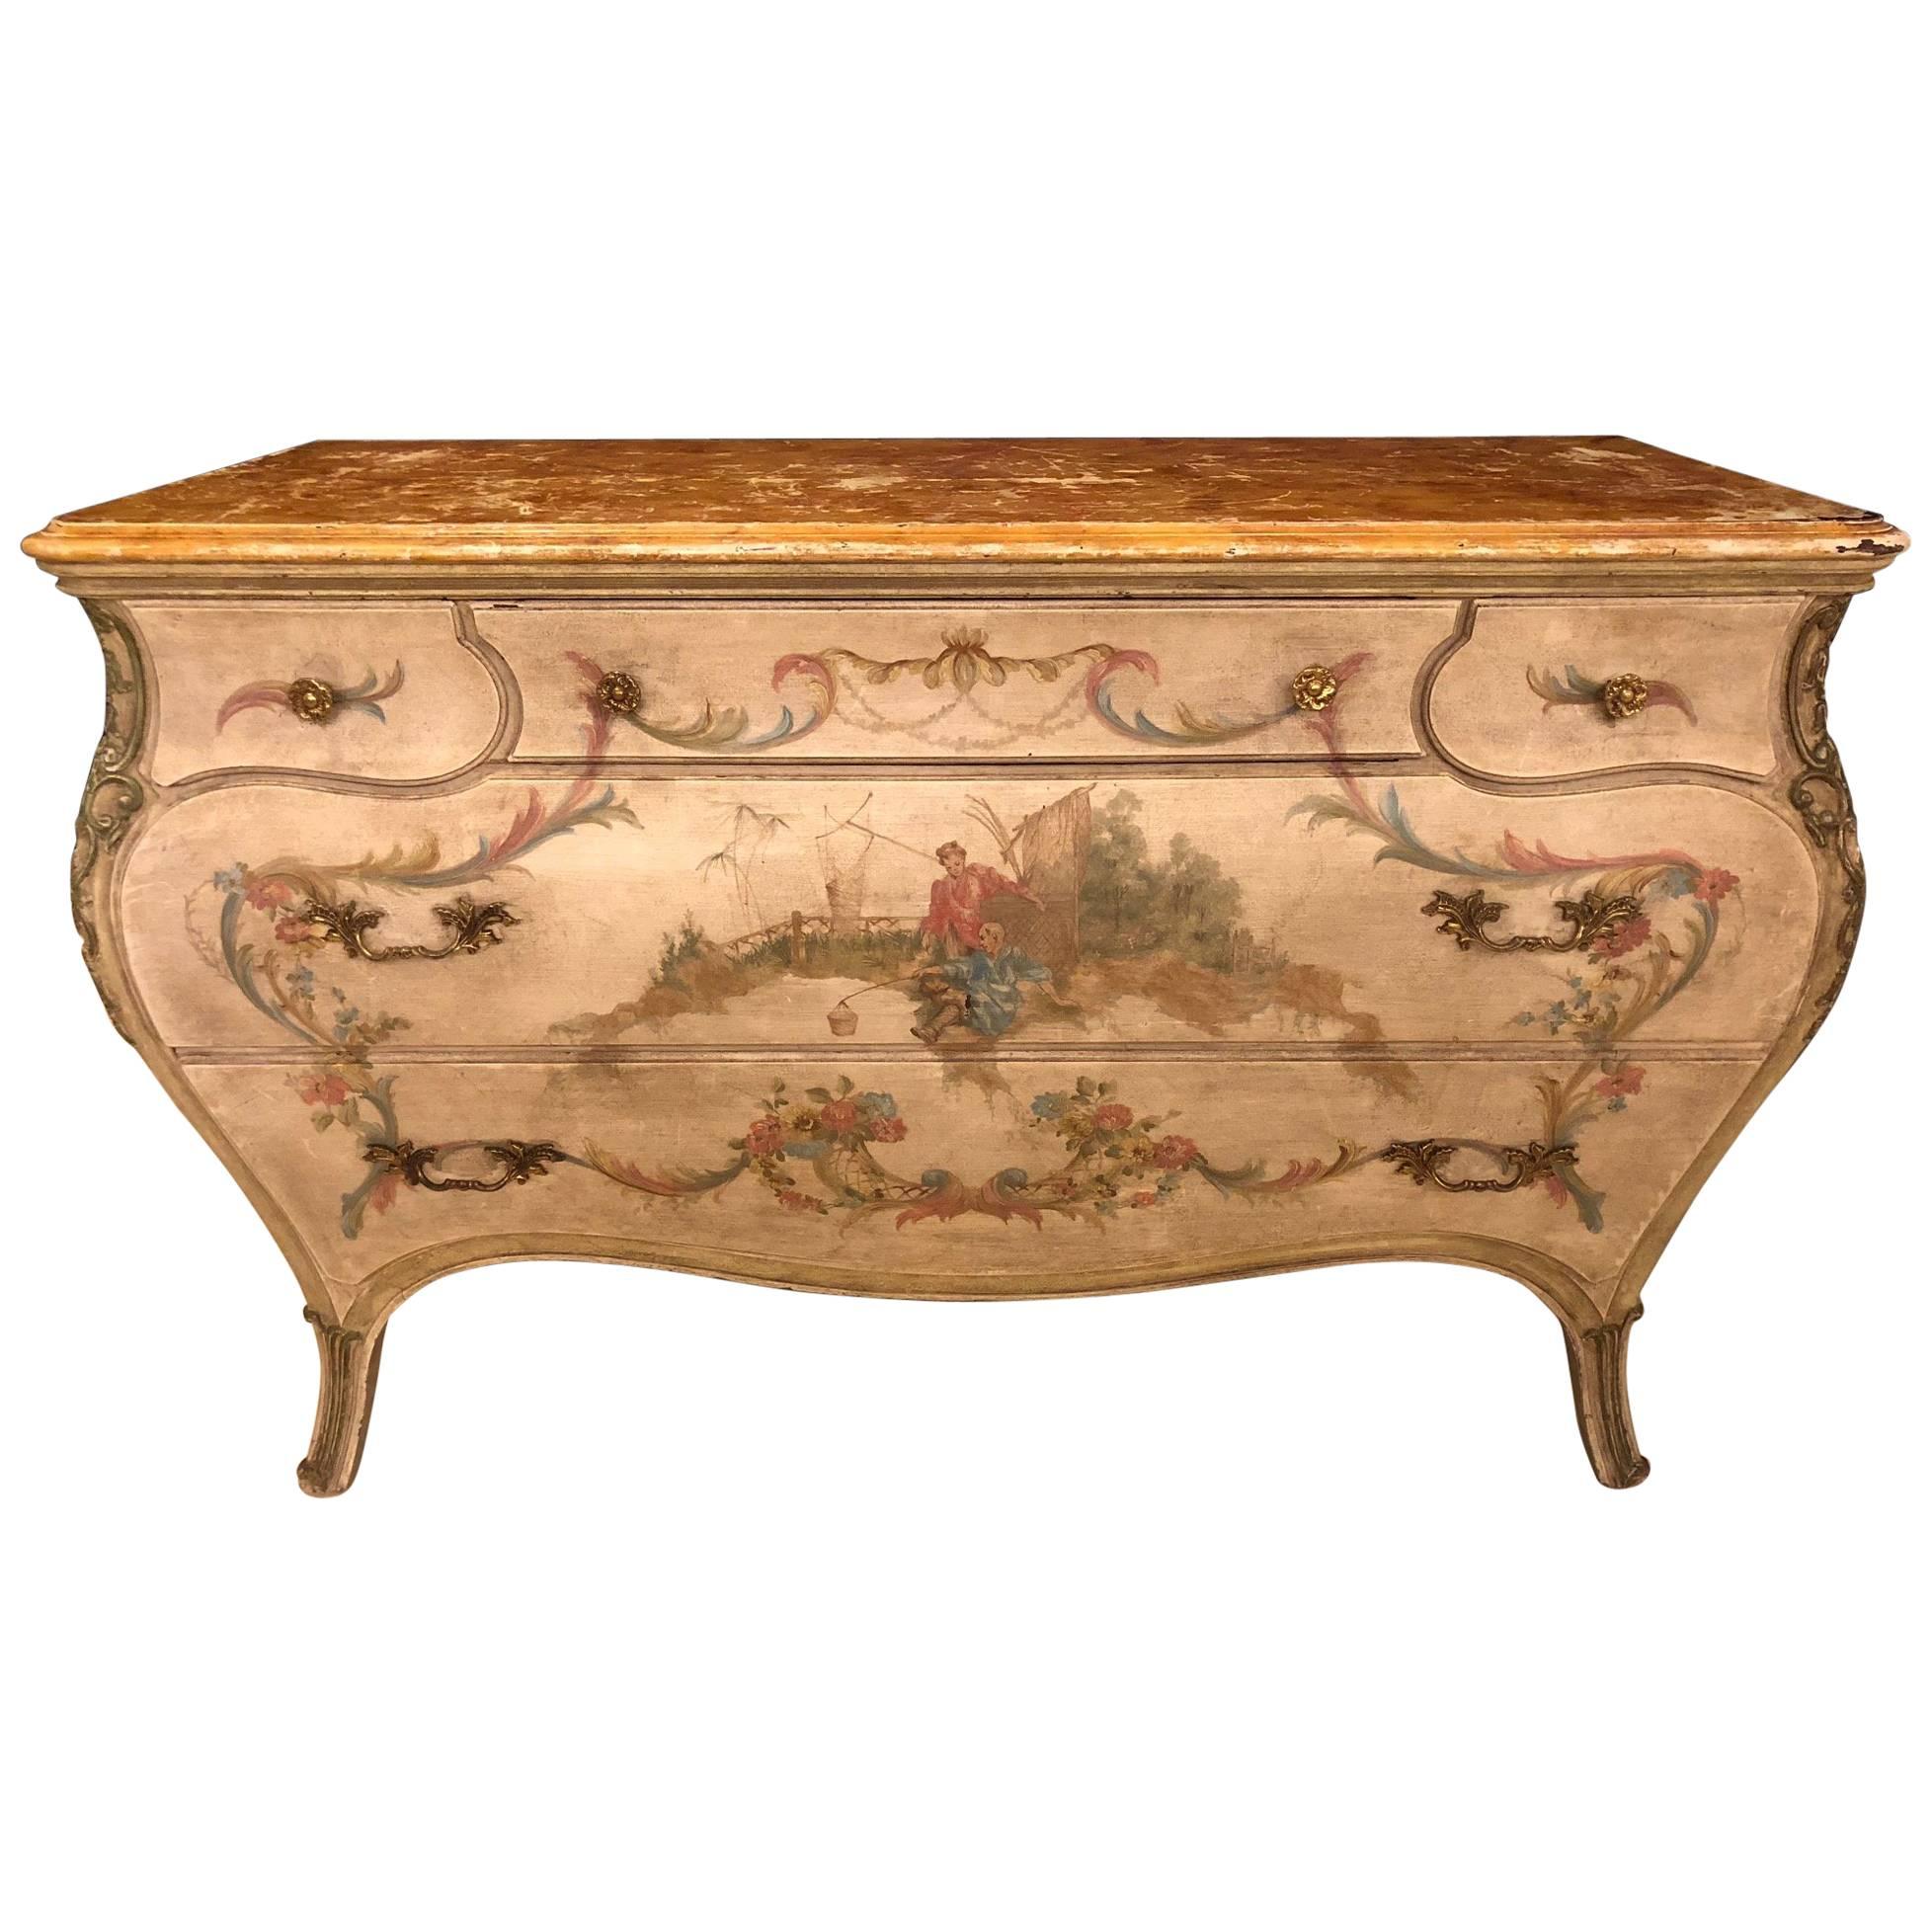 Venetian Scenic Bombe Chinoiserie Painted Commode with a Faux Marble Top